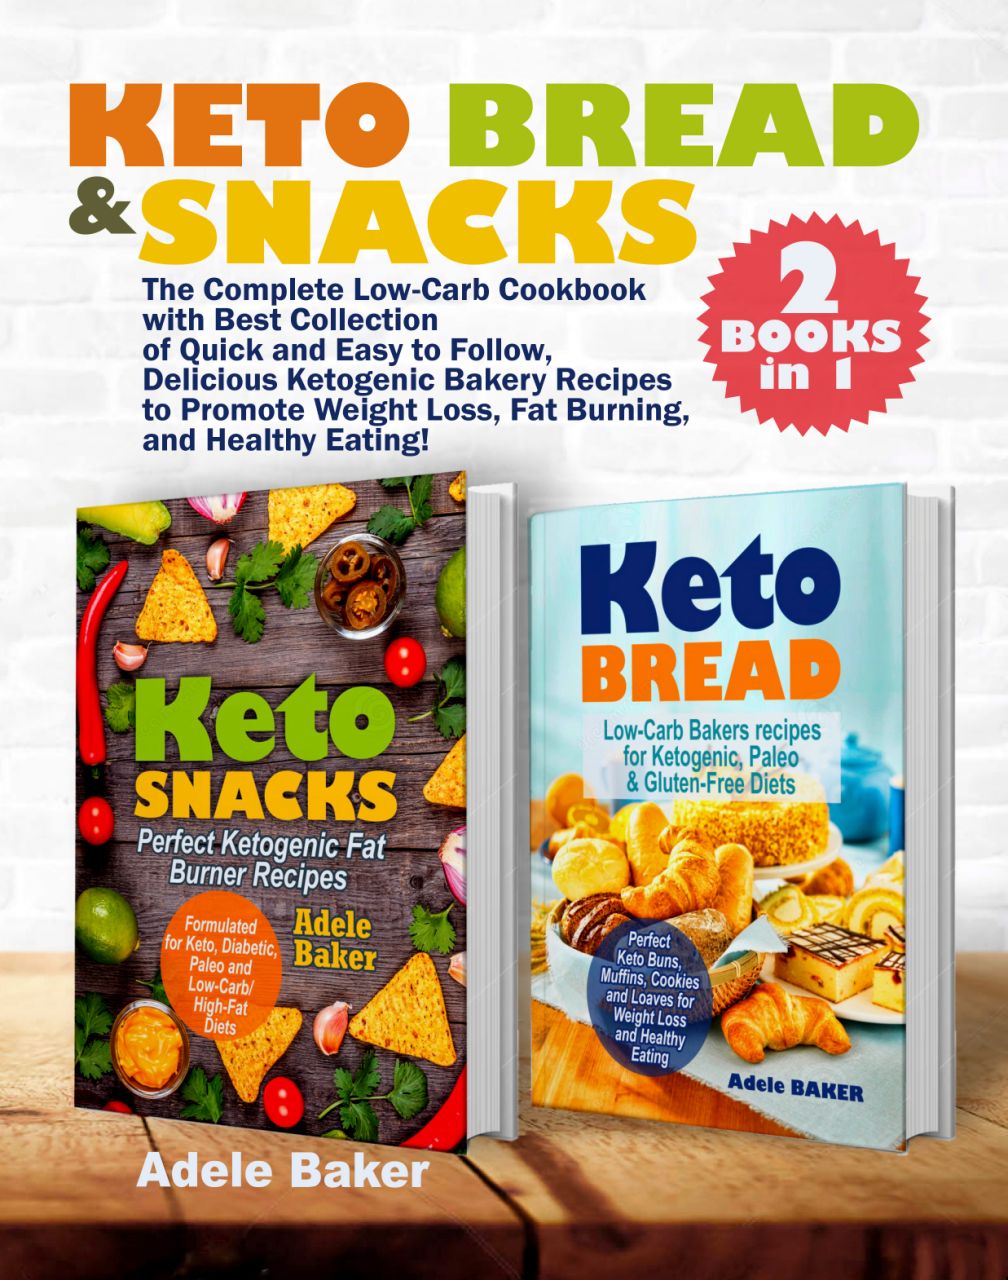 FREE: Keto Bread and Snacks by Adele Baker